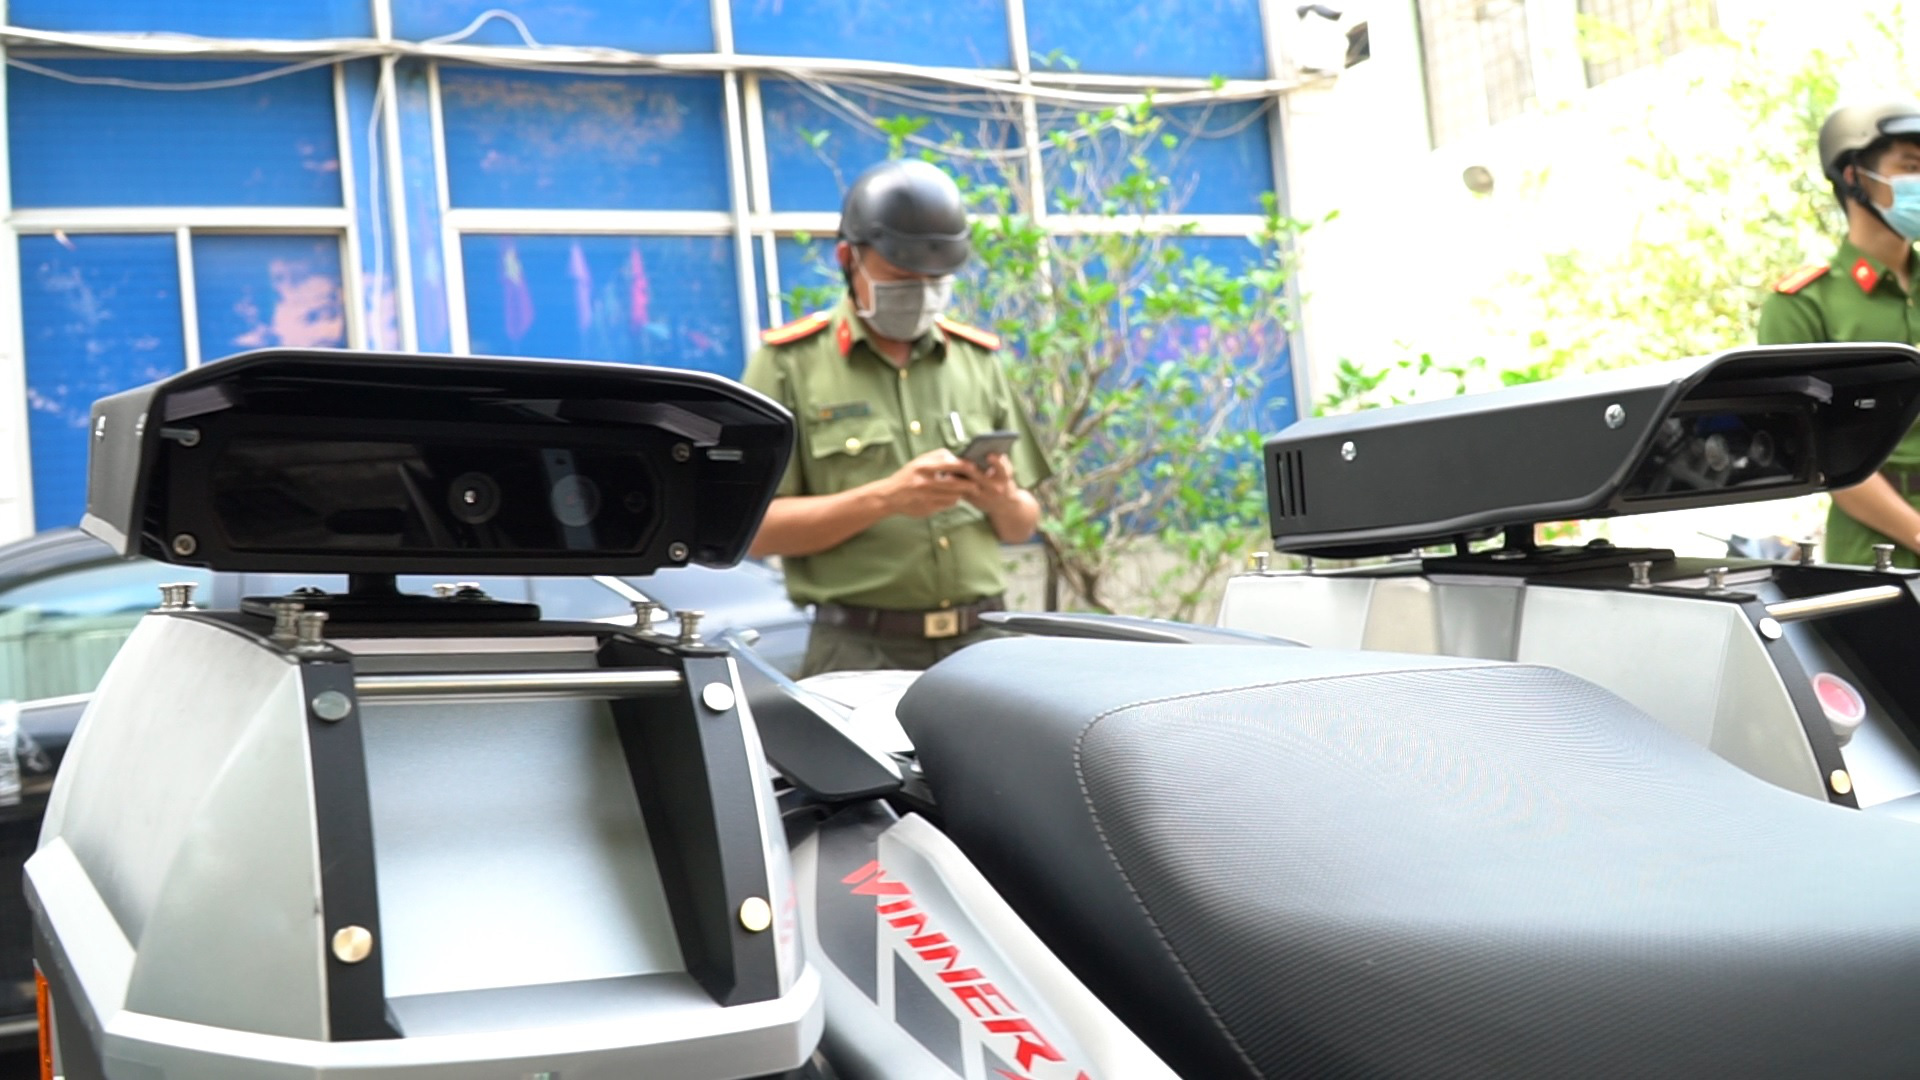 The special motorbike has two cameras on each of its side to scan license plates of vehicles. Photo: D. T. / Tuoi Tre